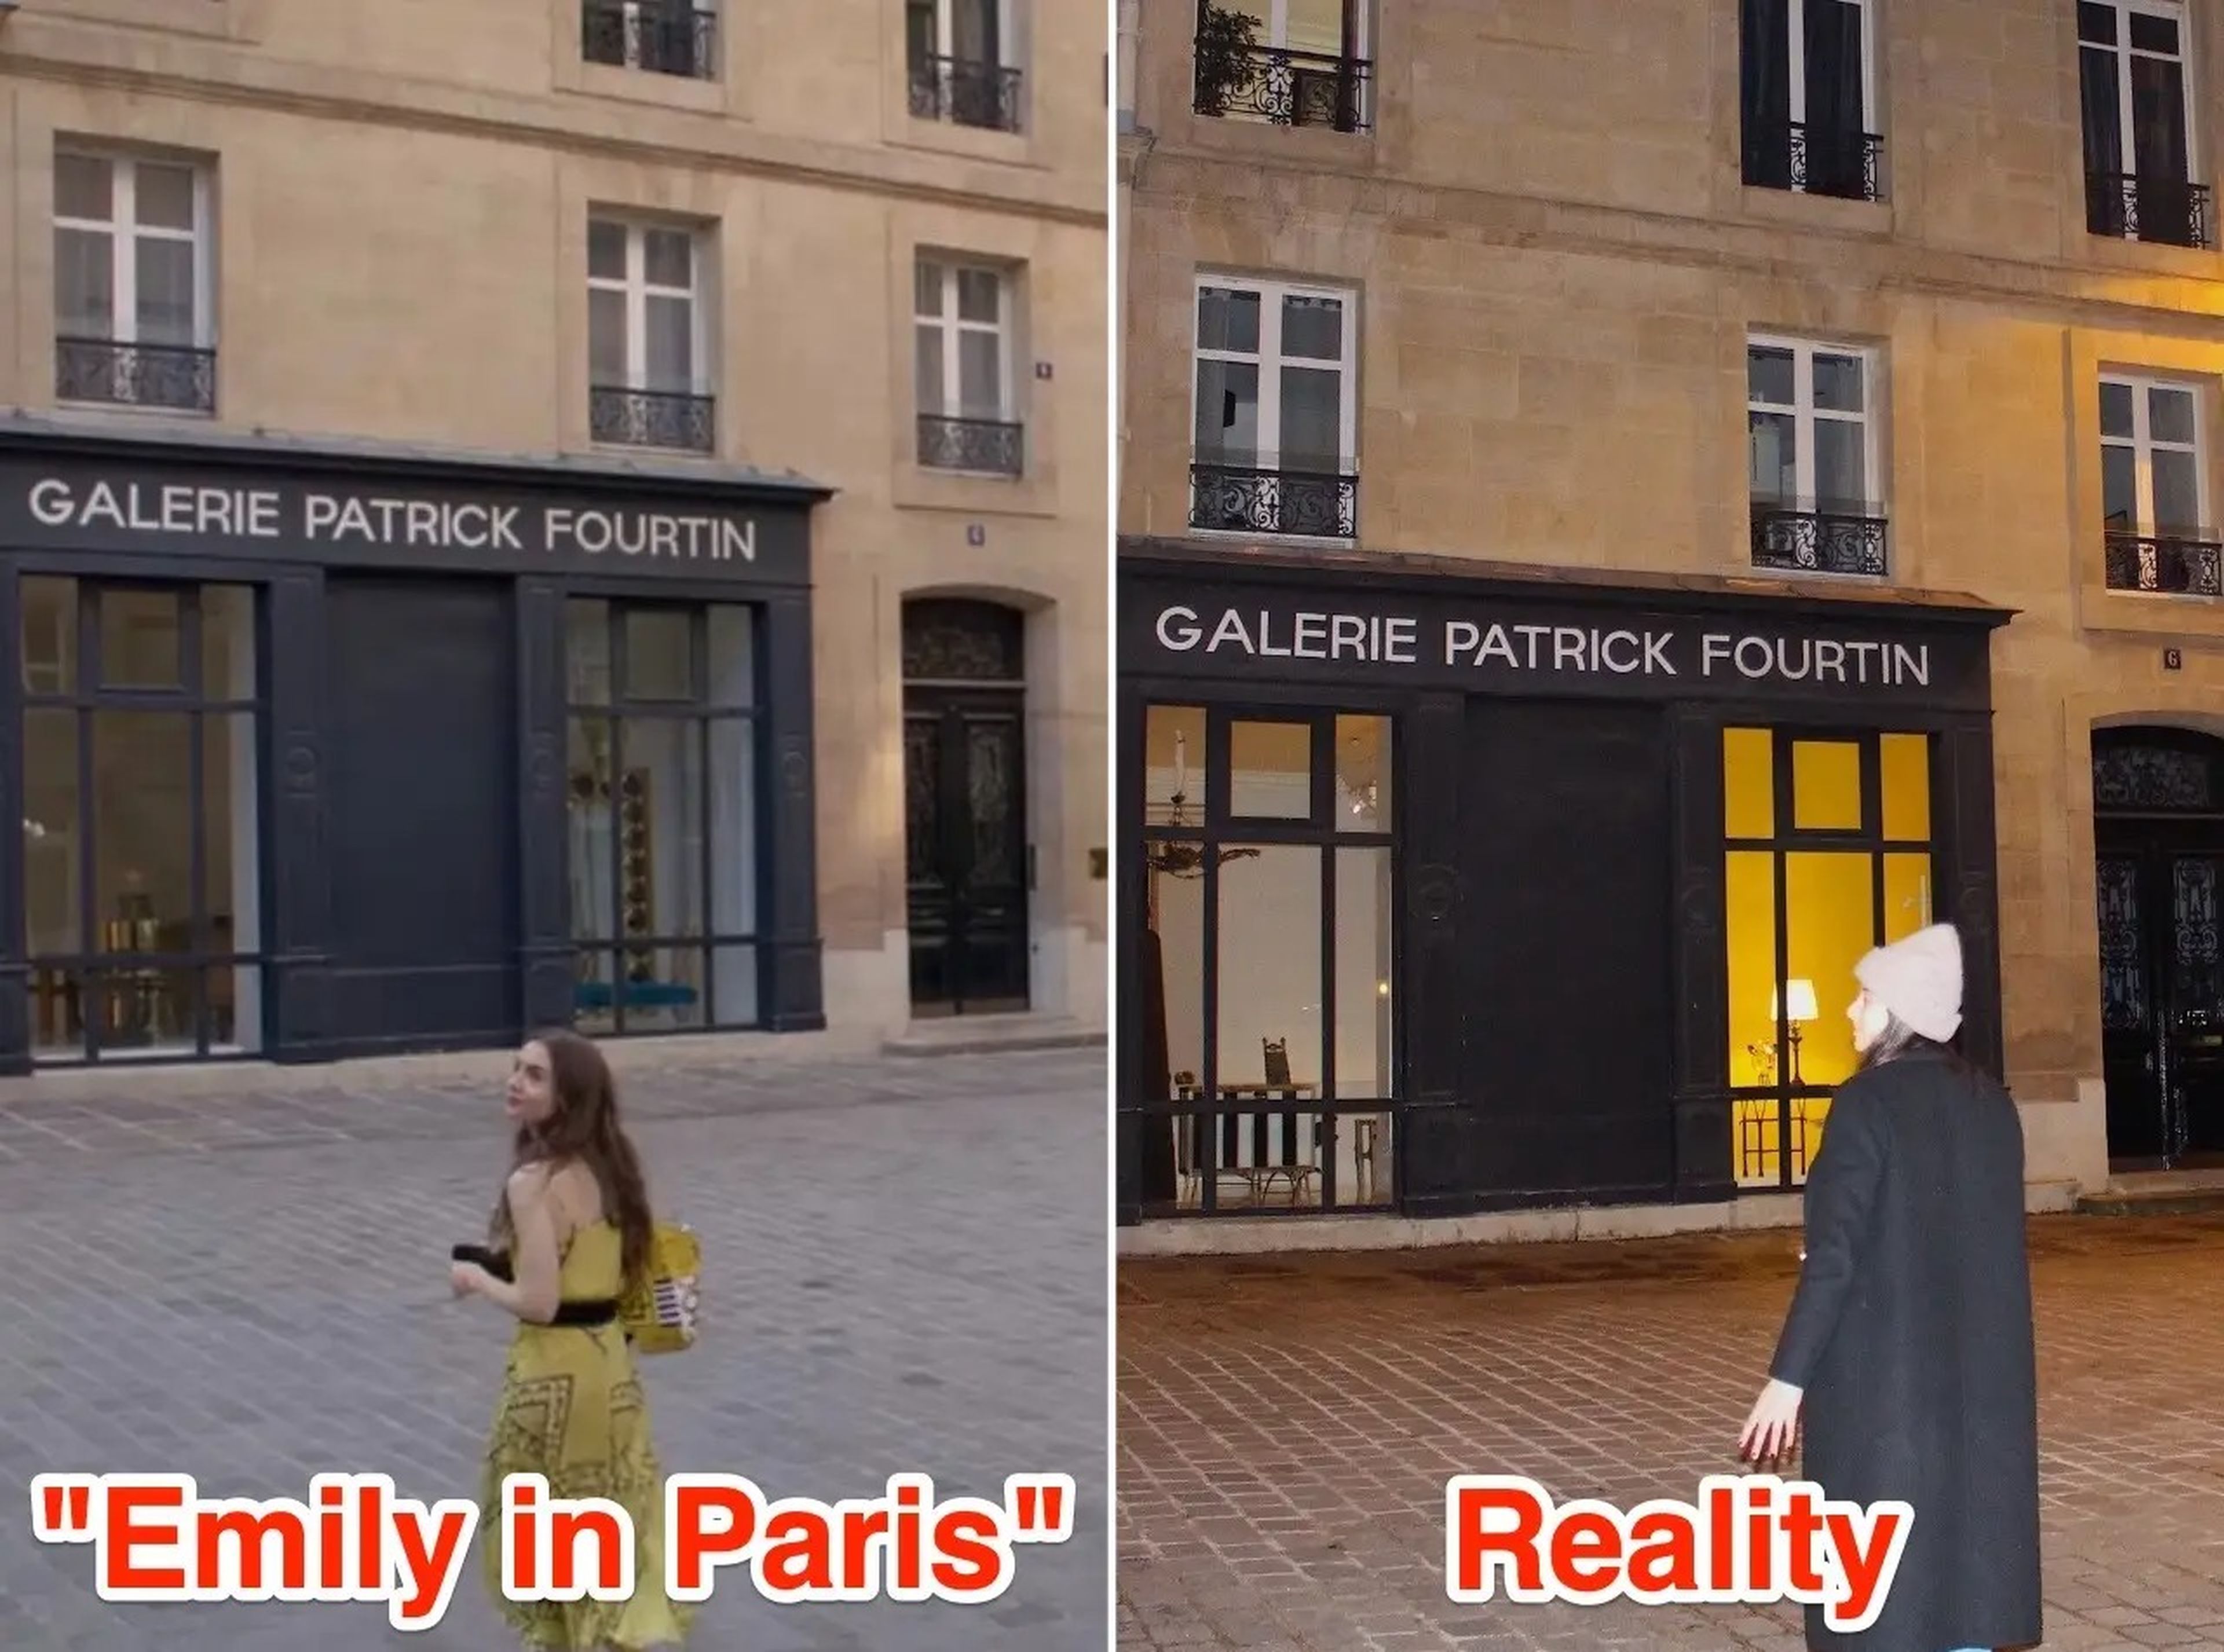 The Savoir offices in "Emily in Paris" (L) and in reality (R).